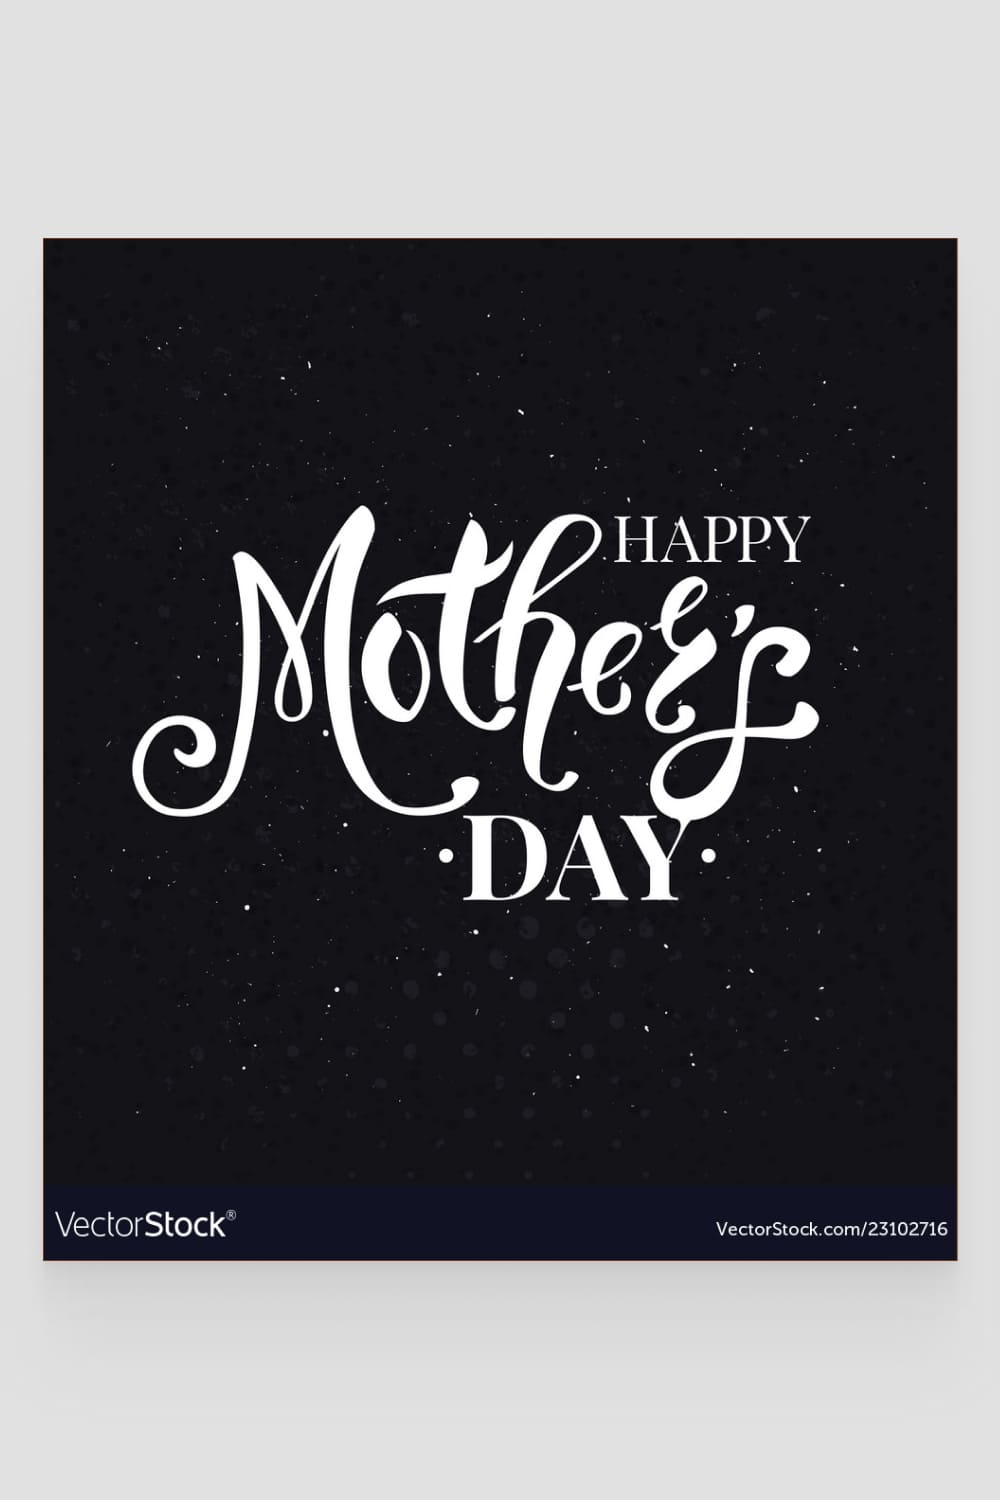 Greeting card with white text on a black background.